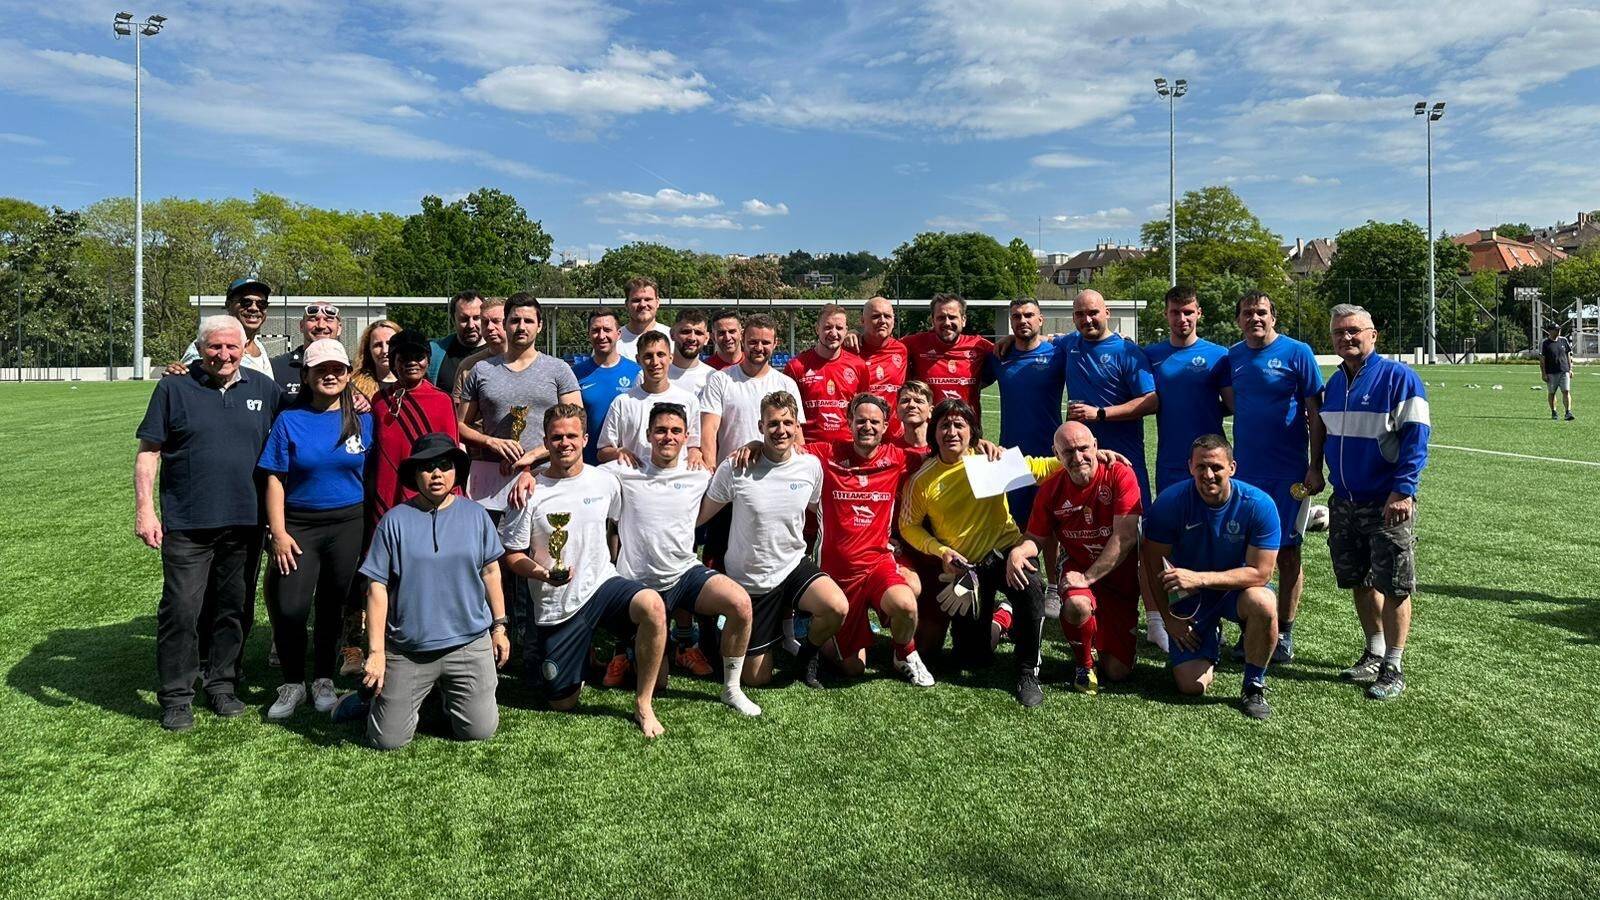 ICC team participates in TF May Day football tournament  